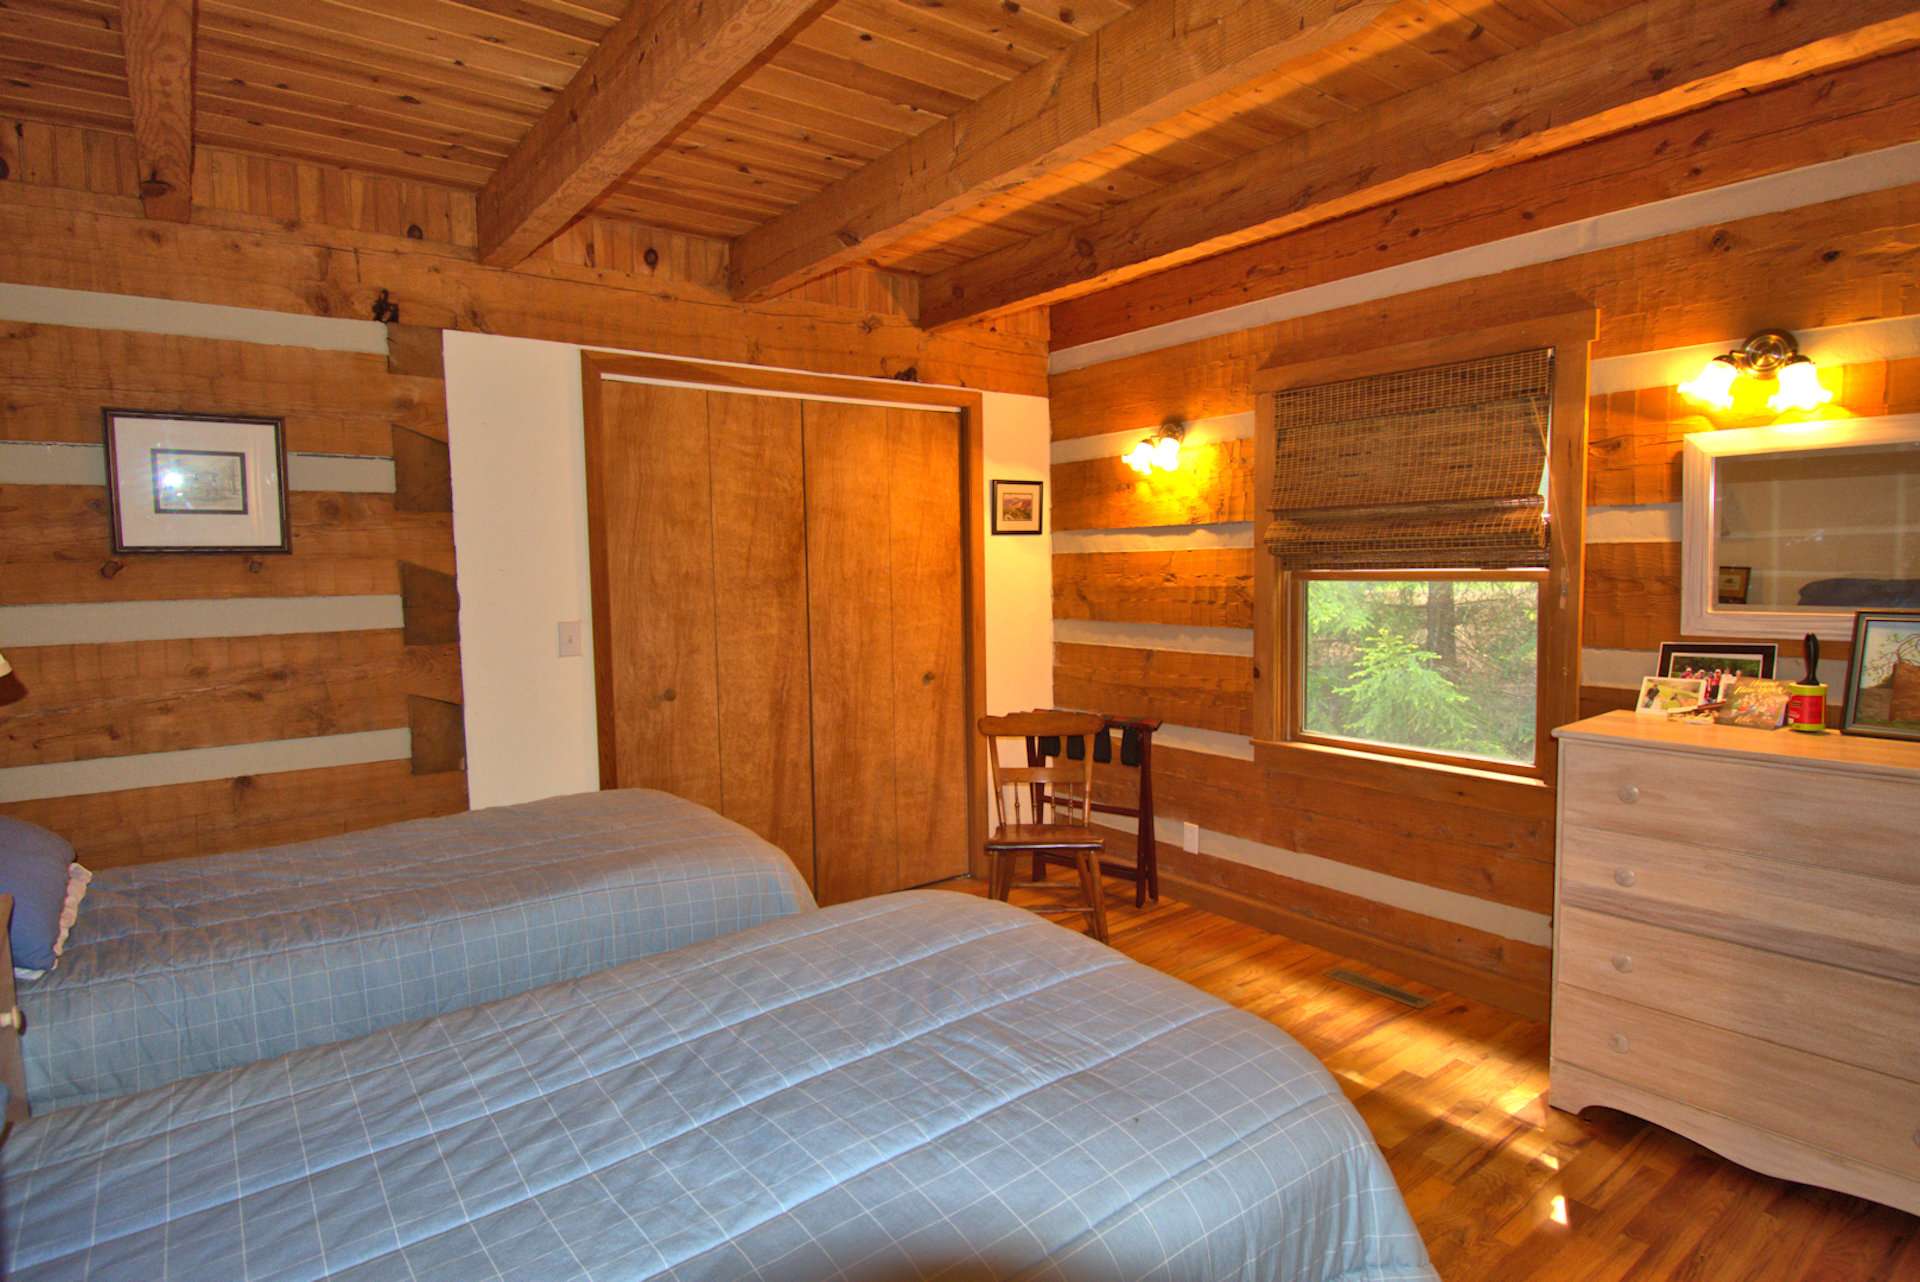 The main level bedroom is spacious with exposed beams.